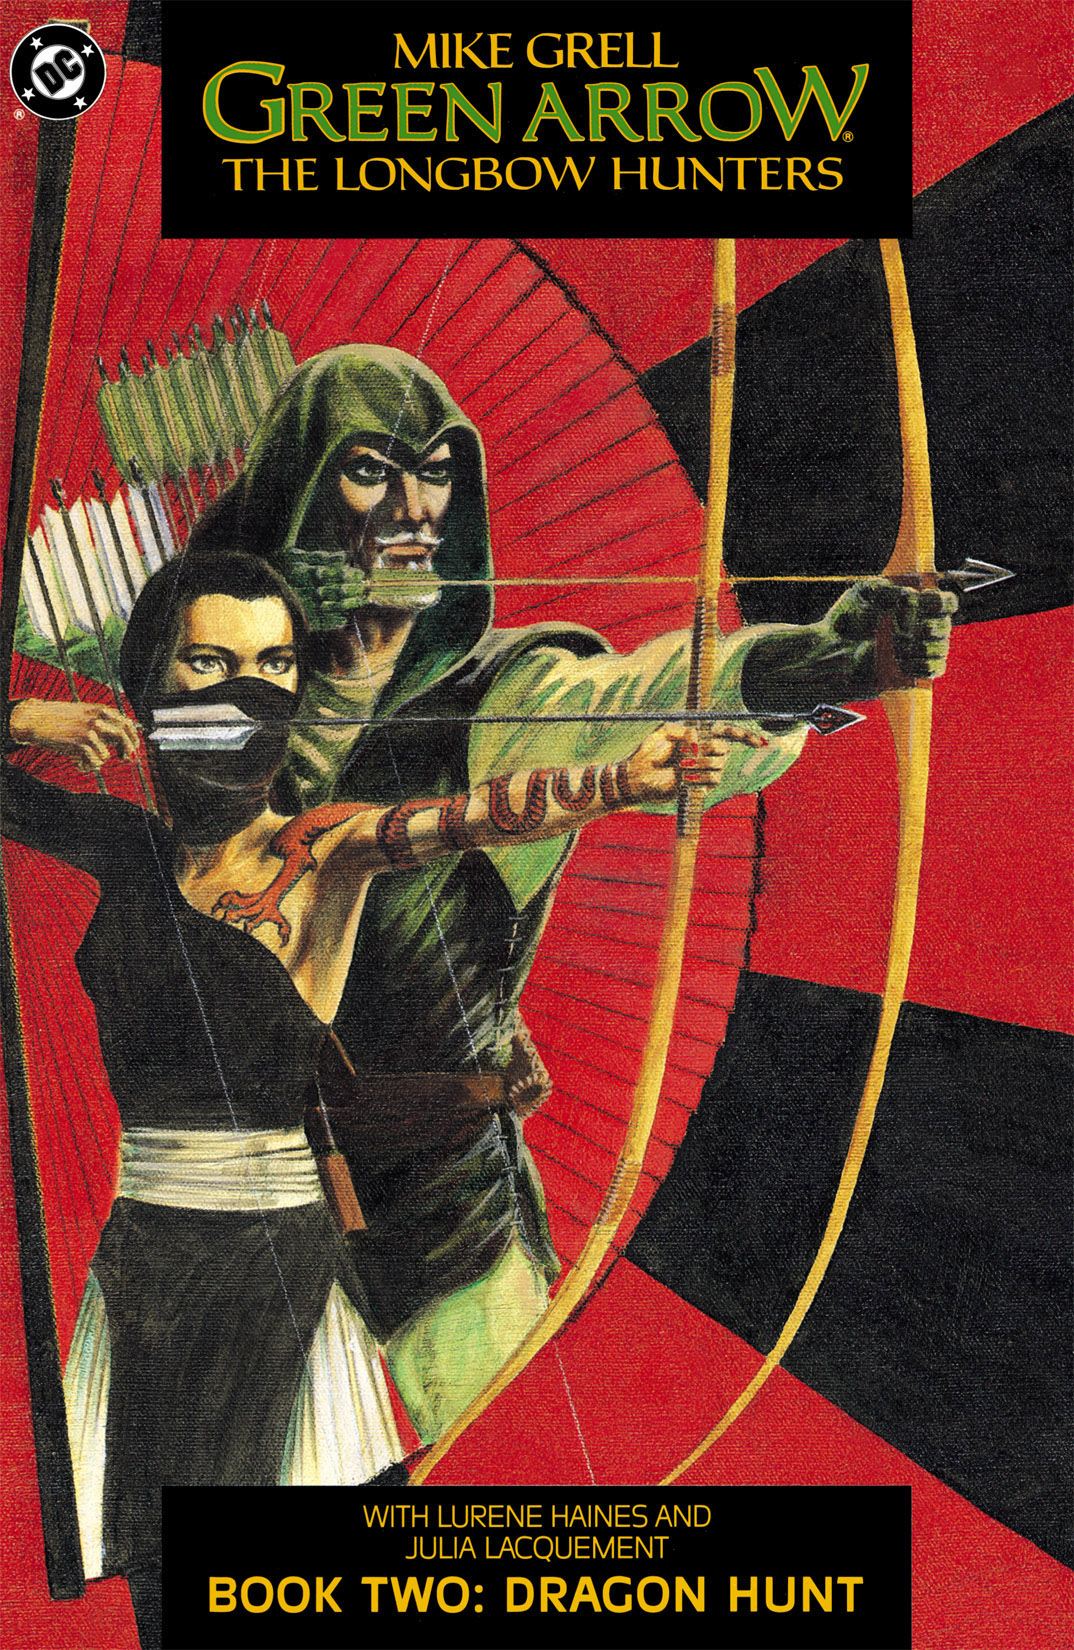 Green Arrow: The Longbow Hunters #2 preview images